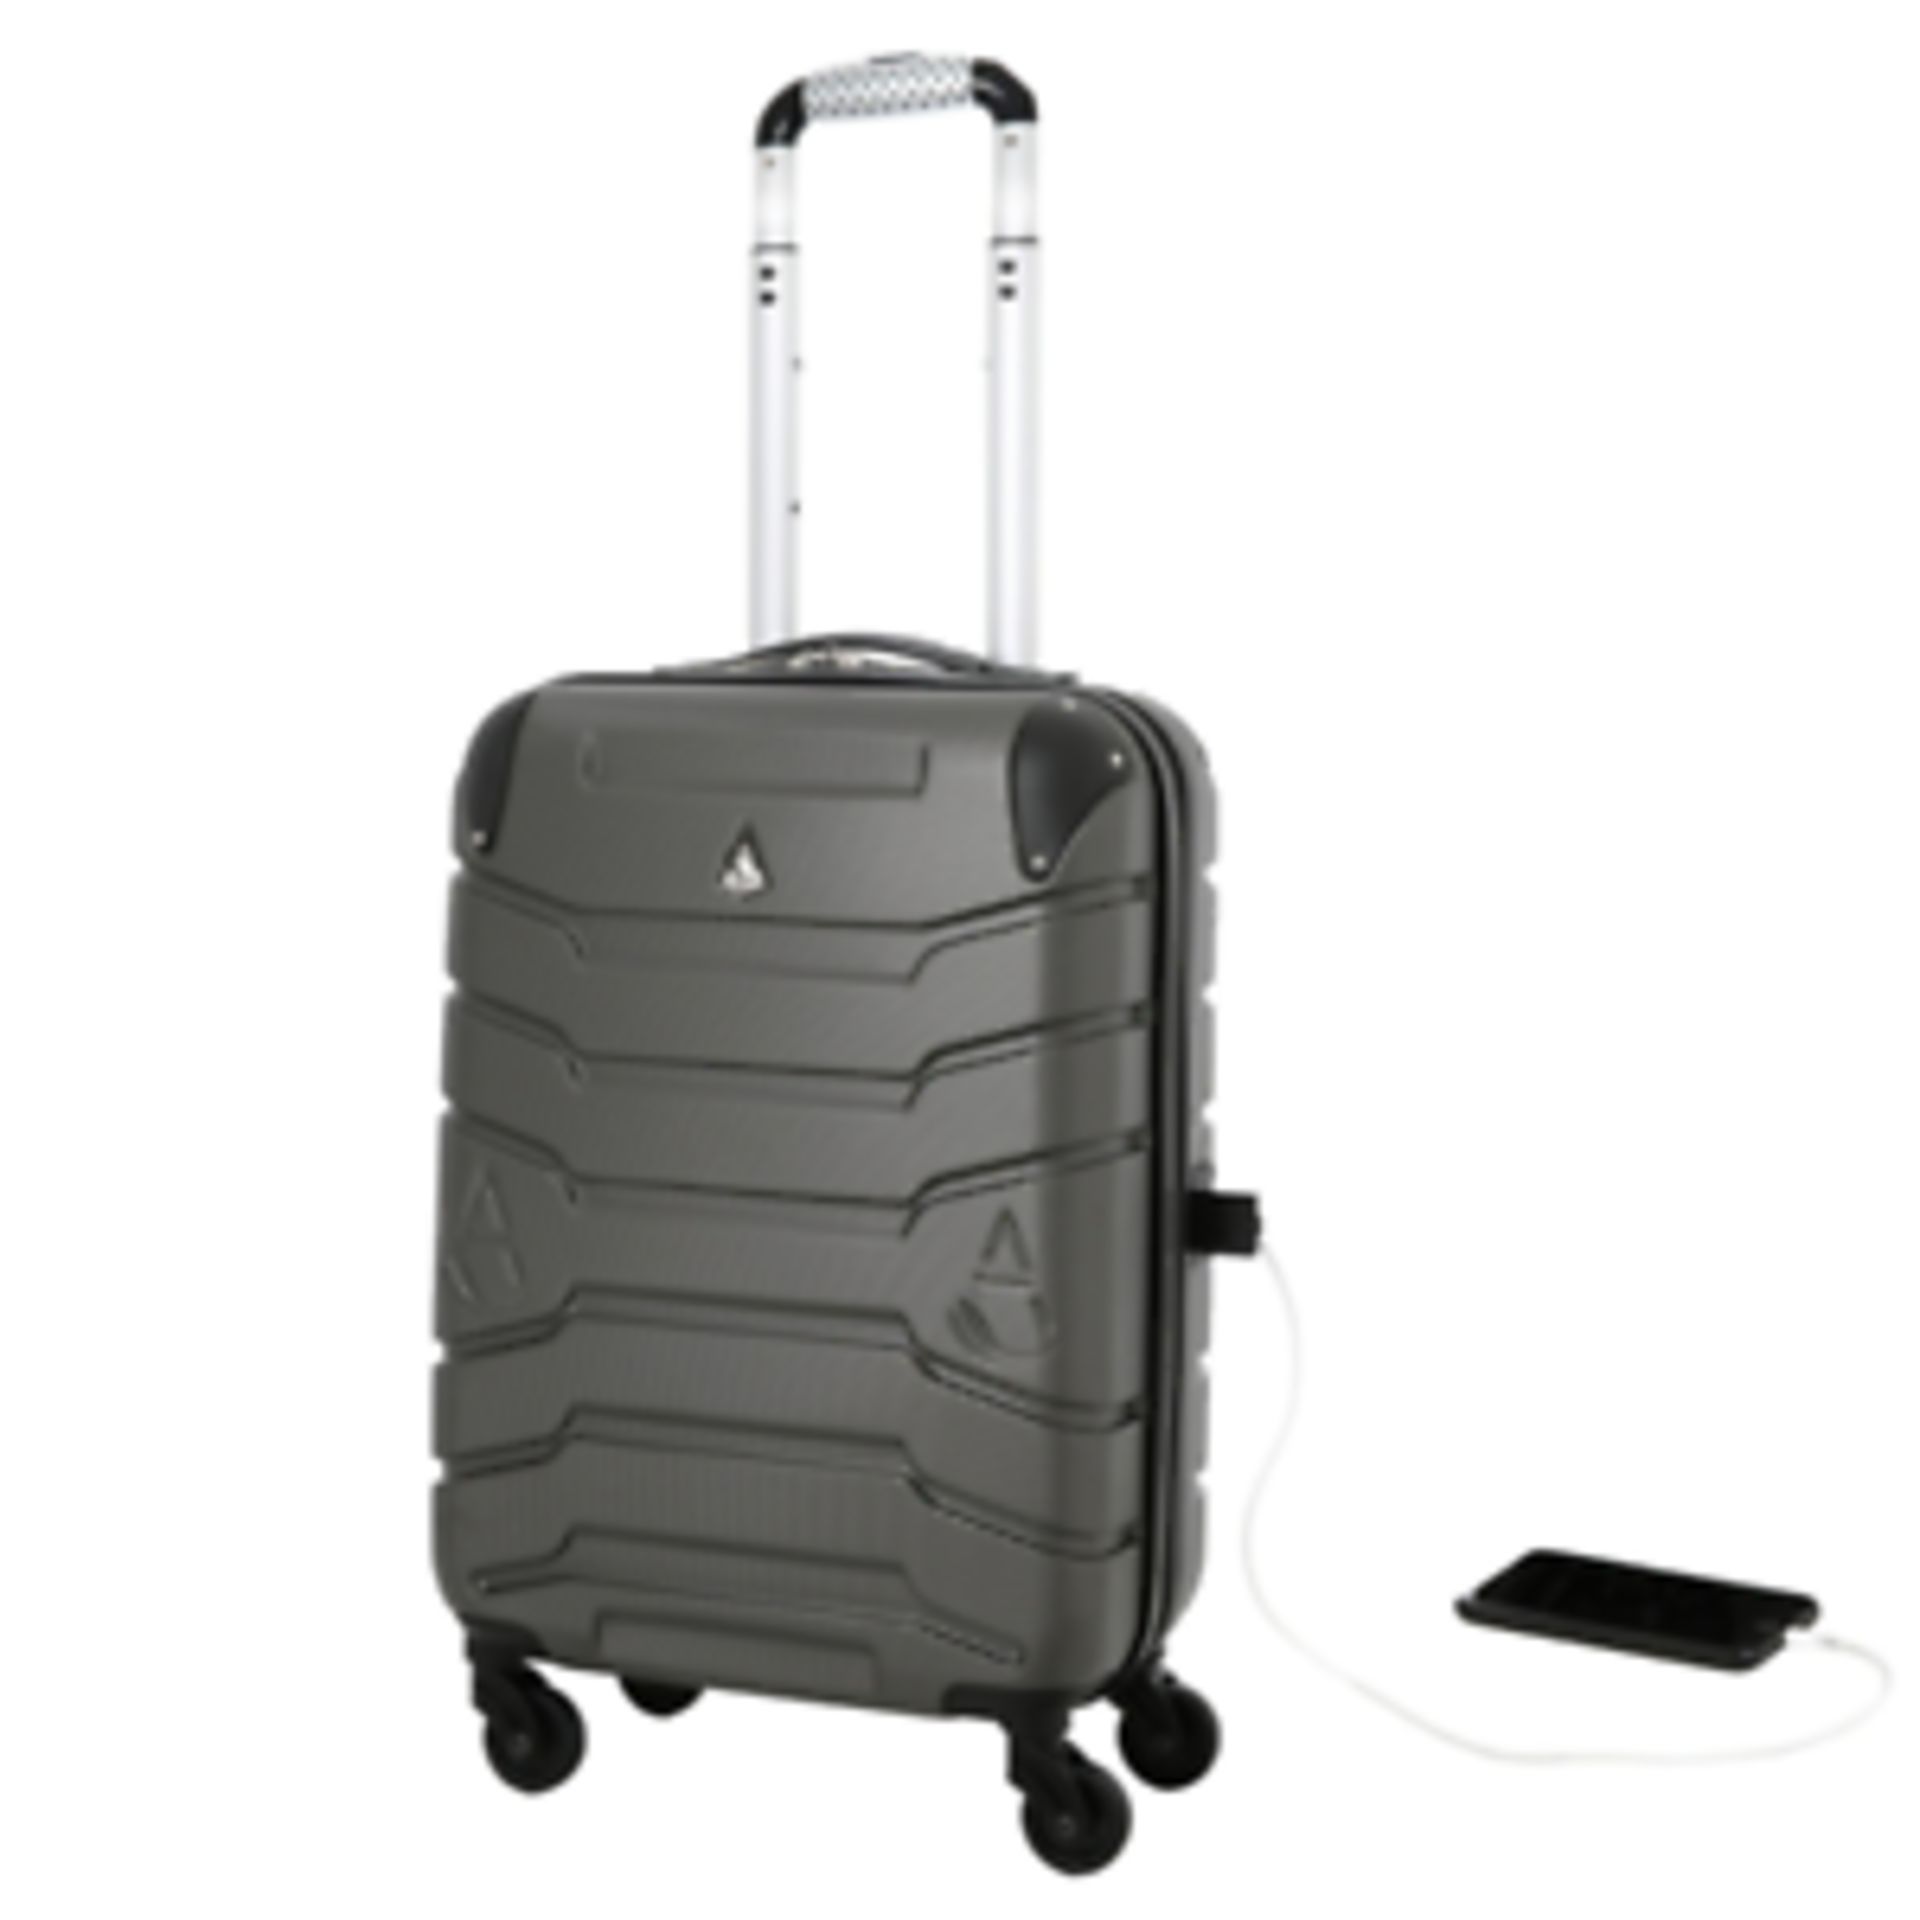 V Brand New Smart 21 Inch Suitcase/Cabin Case With Charging Facilities - Ebay Price £49.99 - 33L